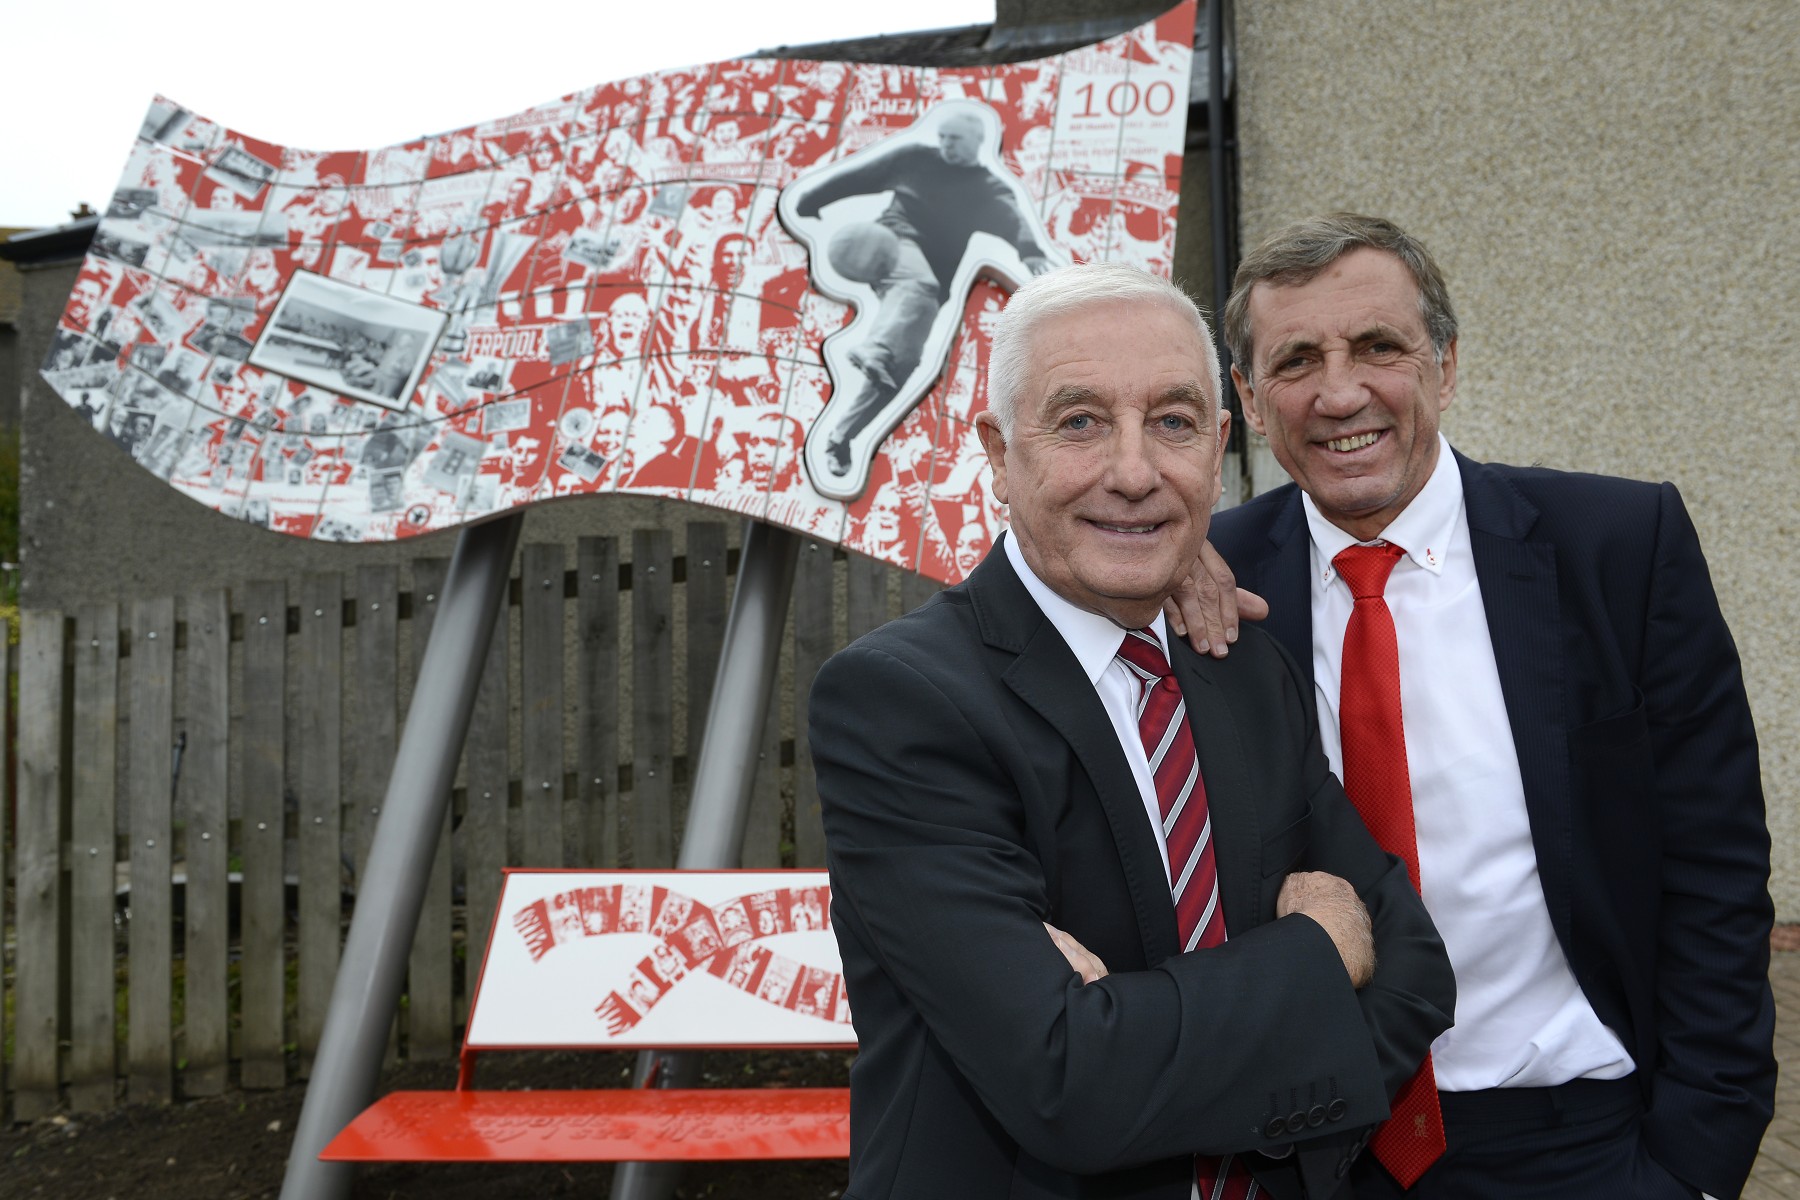 Roy and Alan with the Shankly artwork